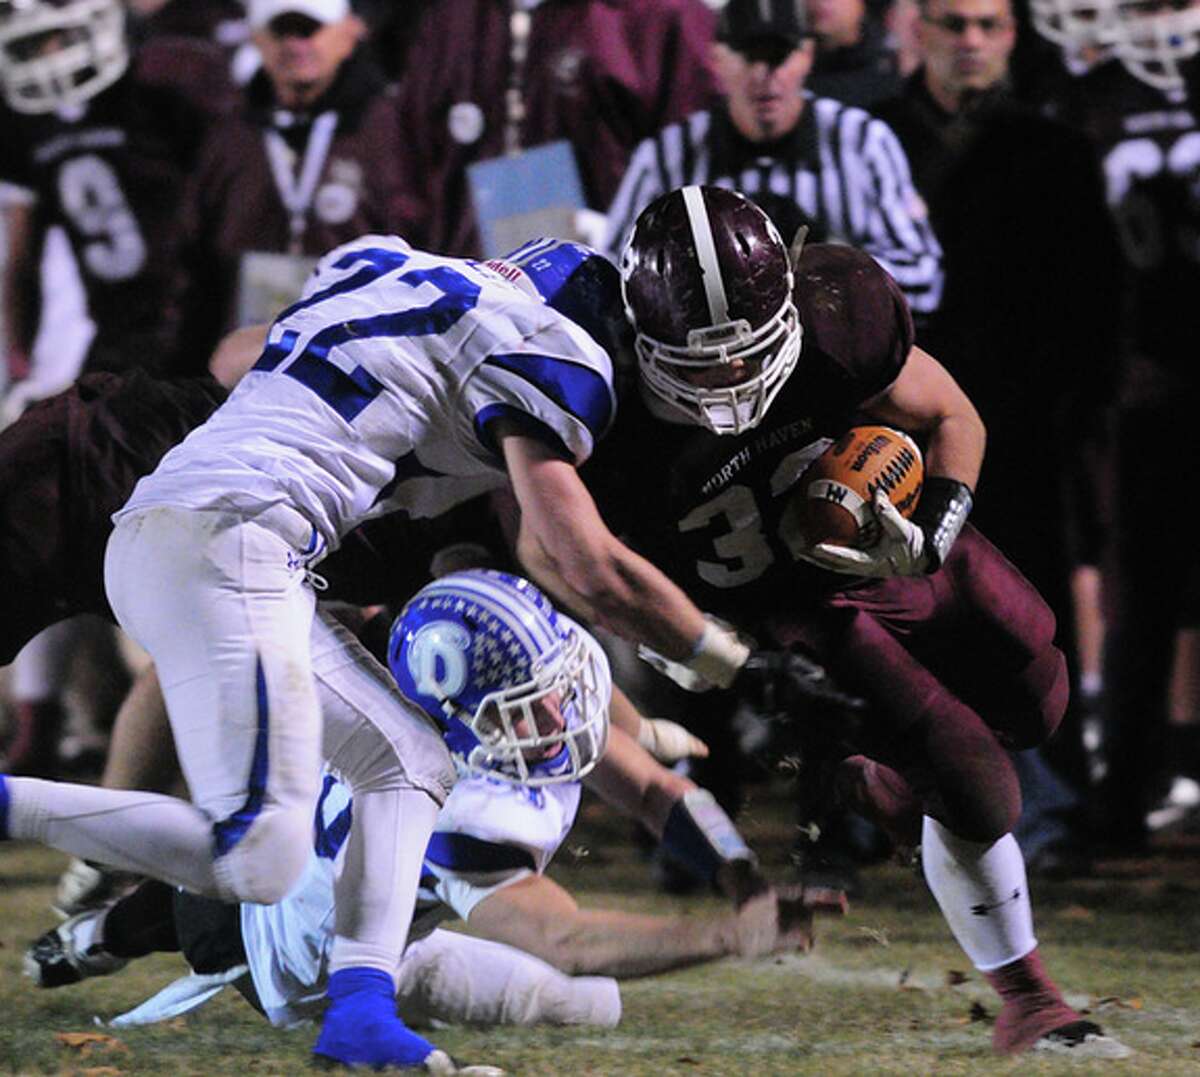 Darien’s Andrew Nault tries to take down North Haven’s Ethan Suraci Friday at Vanacore Field. The Blue Wave defeated North Haven 36-27. (Photo Arnold Gold)